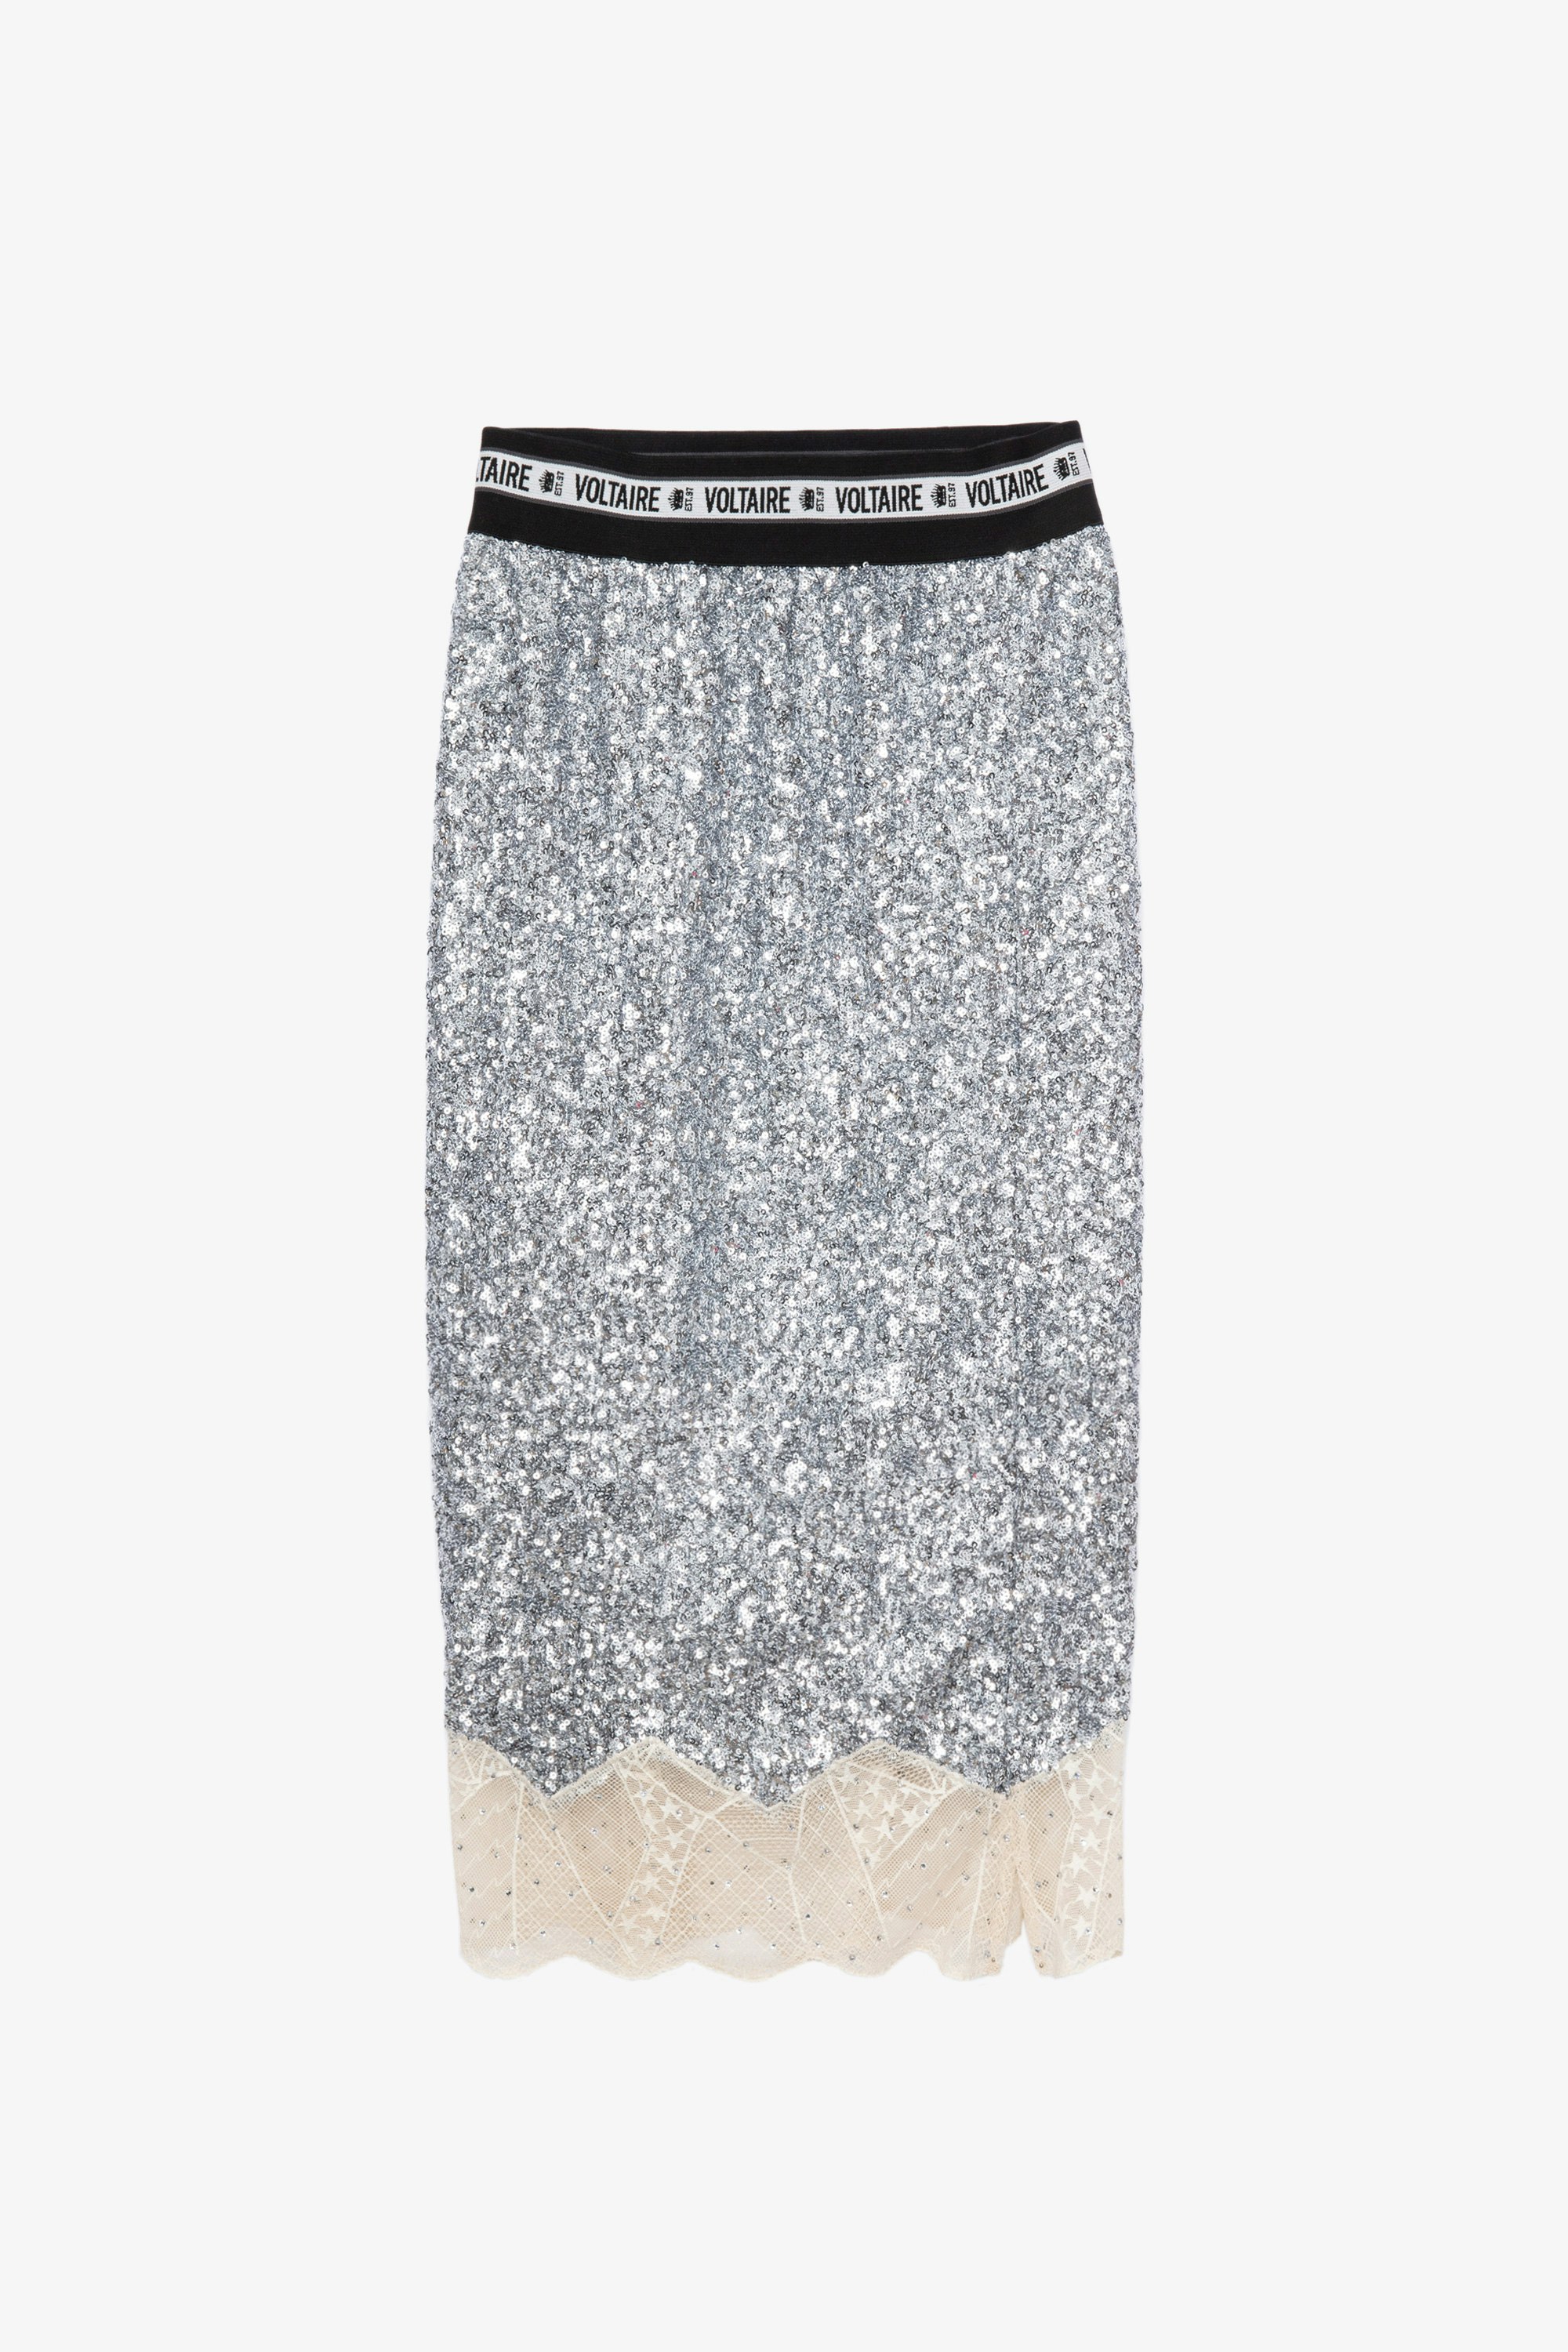 Justicia Sequins スカート Women’s midi skirt decorated with silver sequins and lace trim 